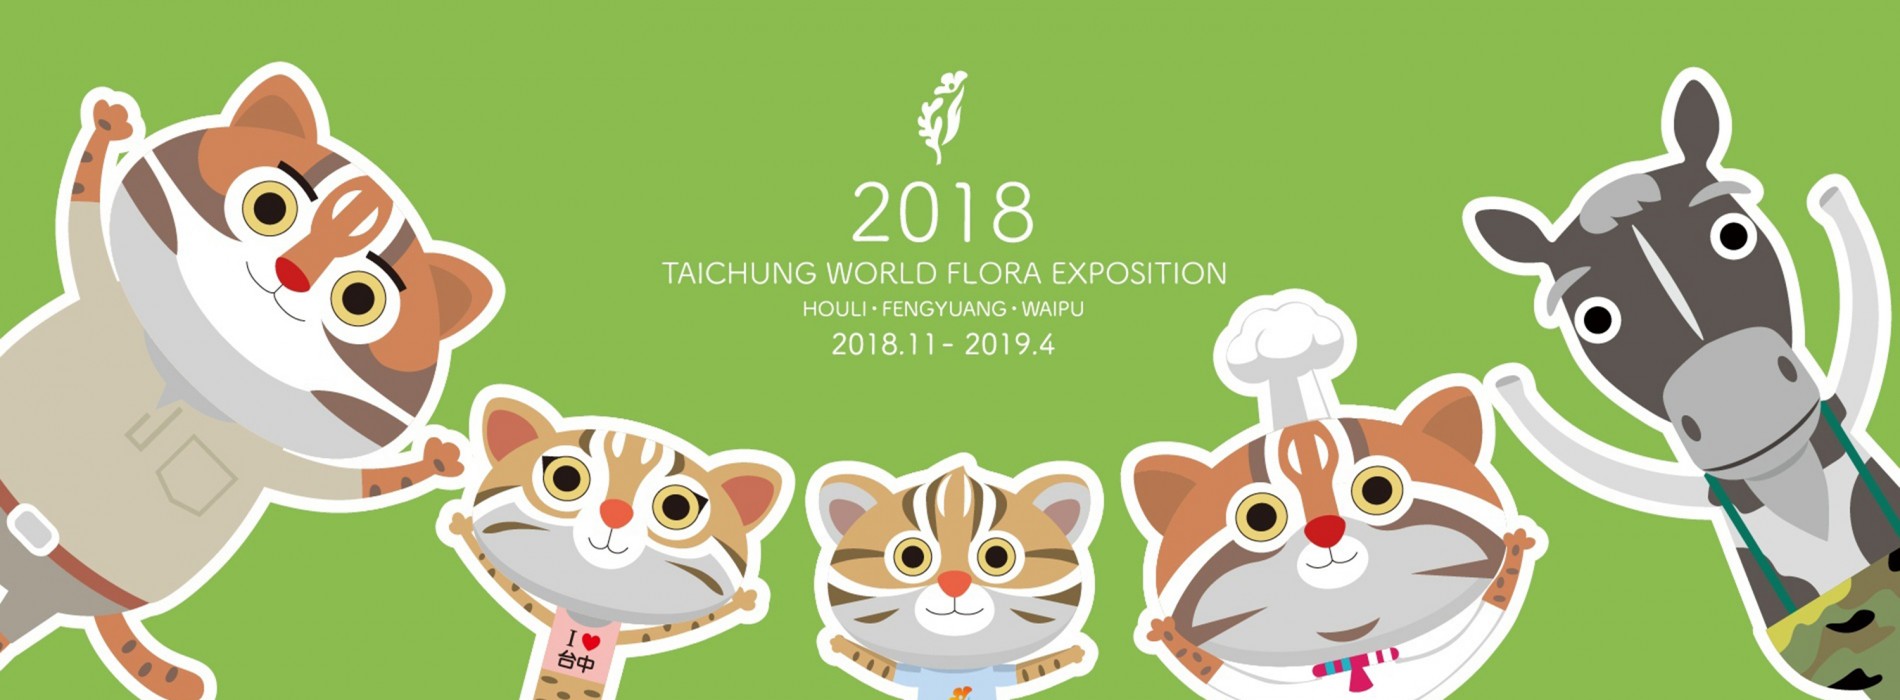 Taichung World Flora Expo 2018 to be held from 3 November